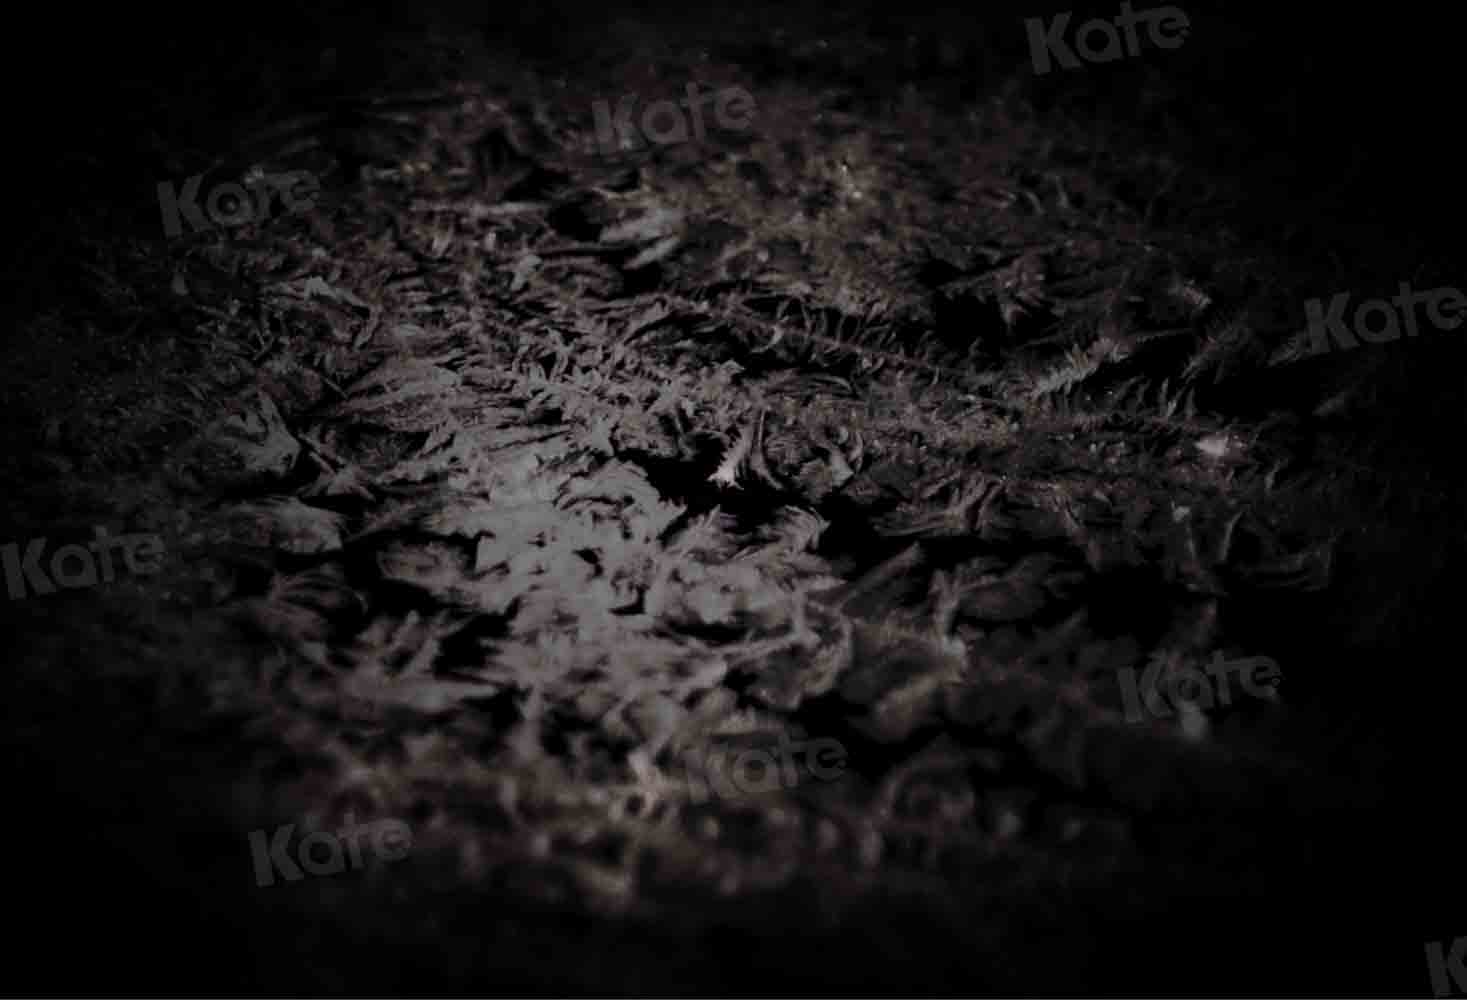 Kate Abstract Black Backdrop Frost Texture Designed by Kate Image